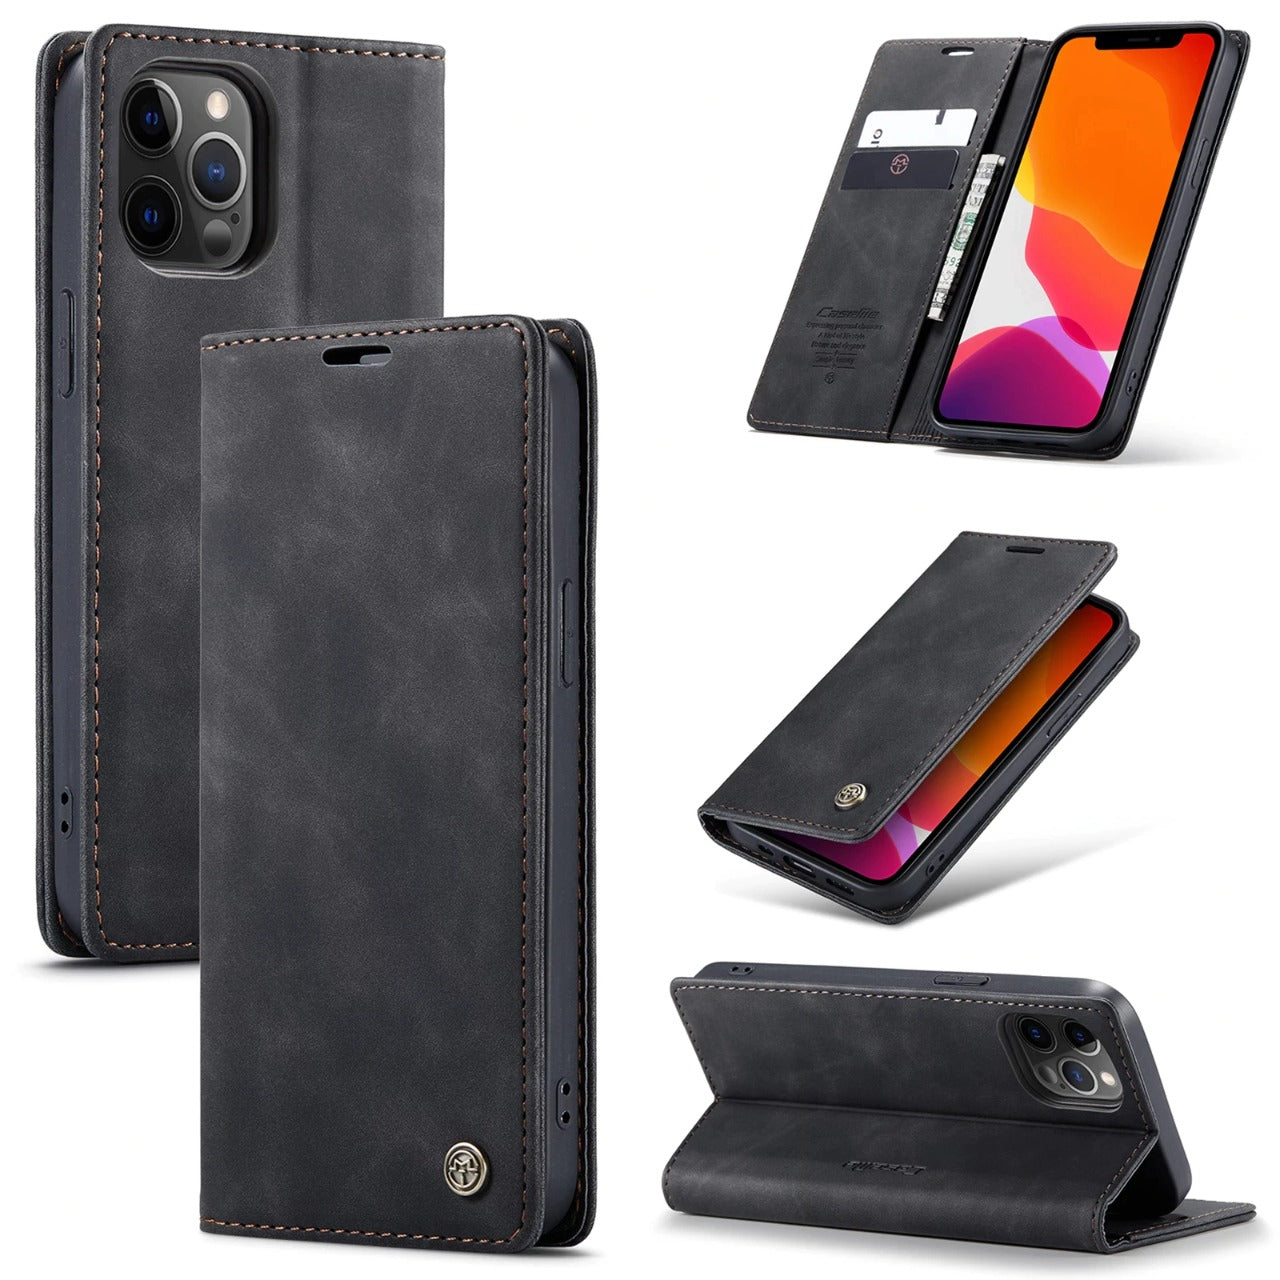 [ FREE SHIPPING] CaseMe Retro Leather Case For Iphone 11 Pro Max Book Style Flip Wallet Magnetic Cover Card Slots Case For Iphone 11 Pro Max